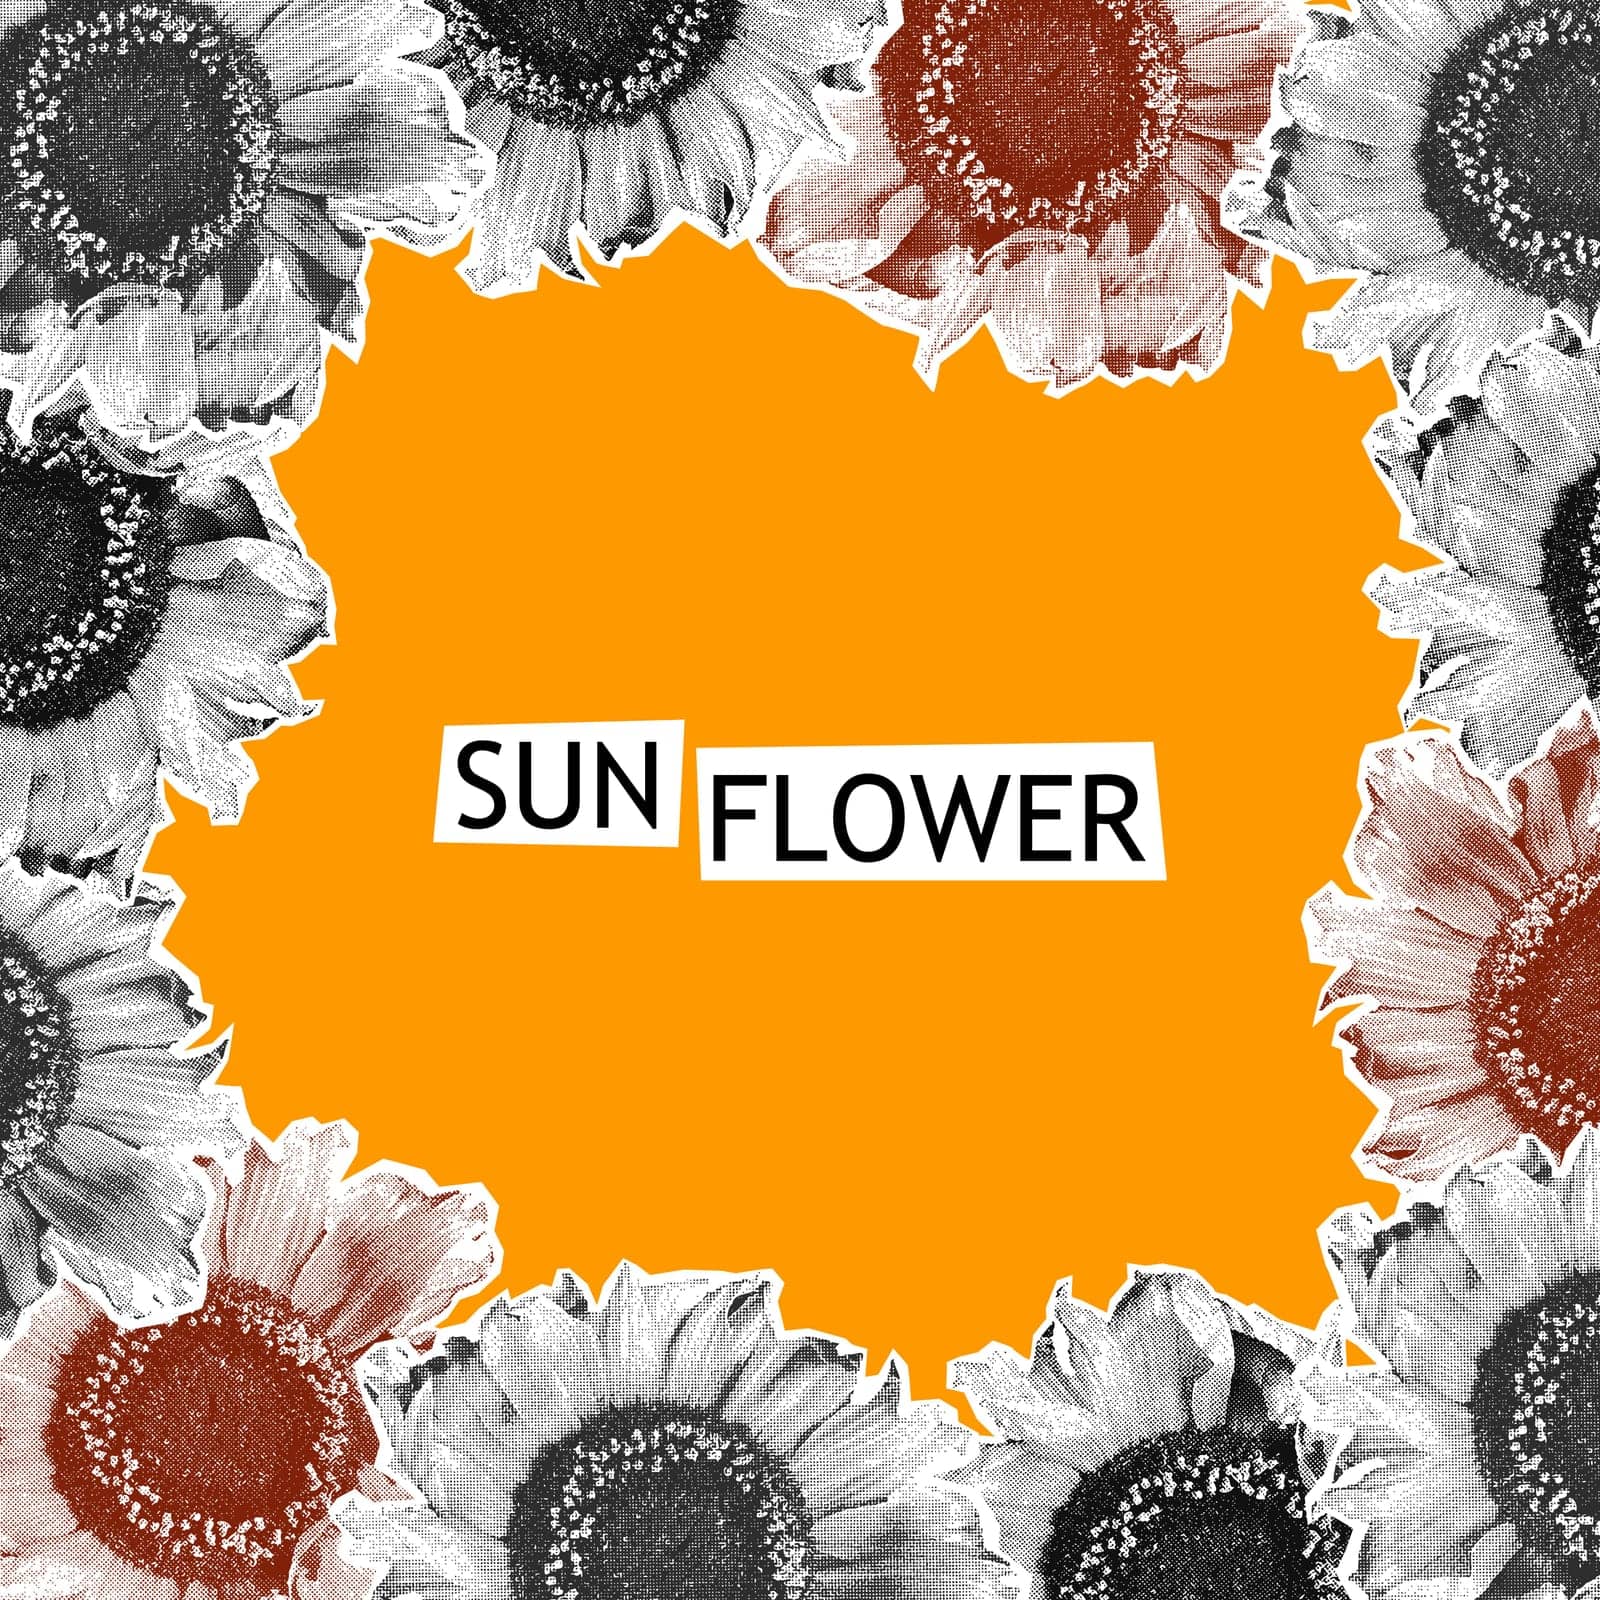 Sunflowers halftone collage poster template vector illustration by ugguggu